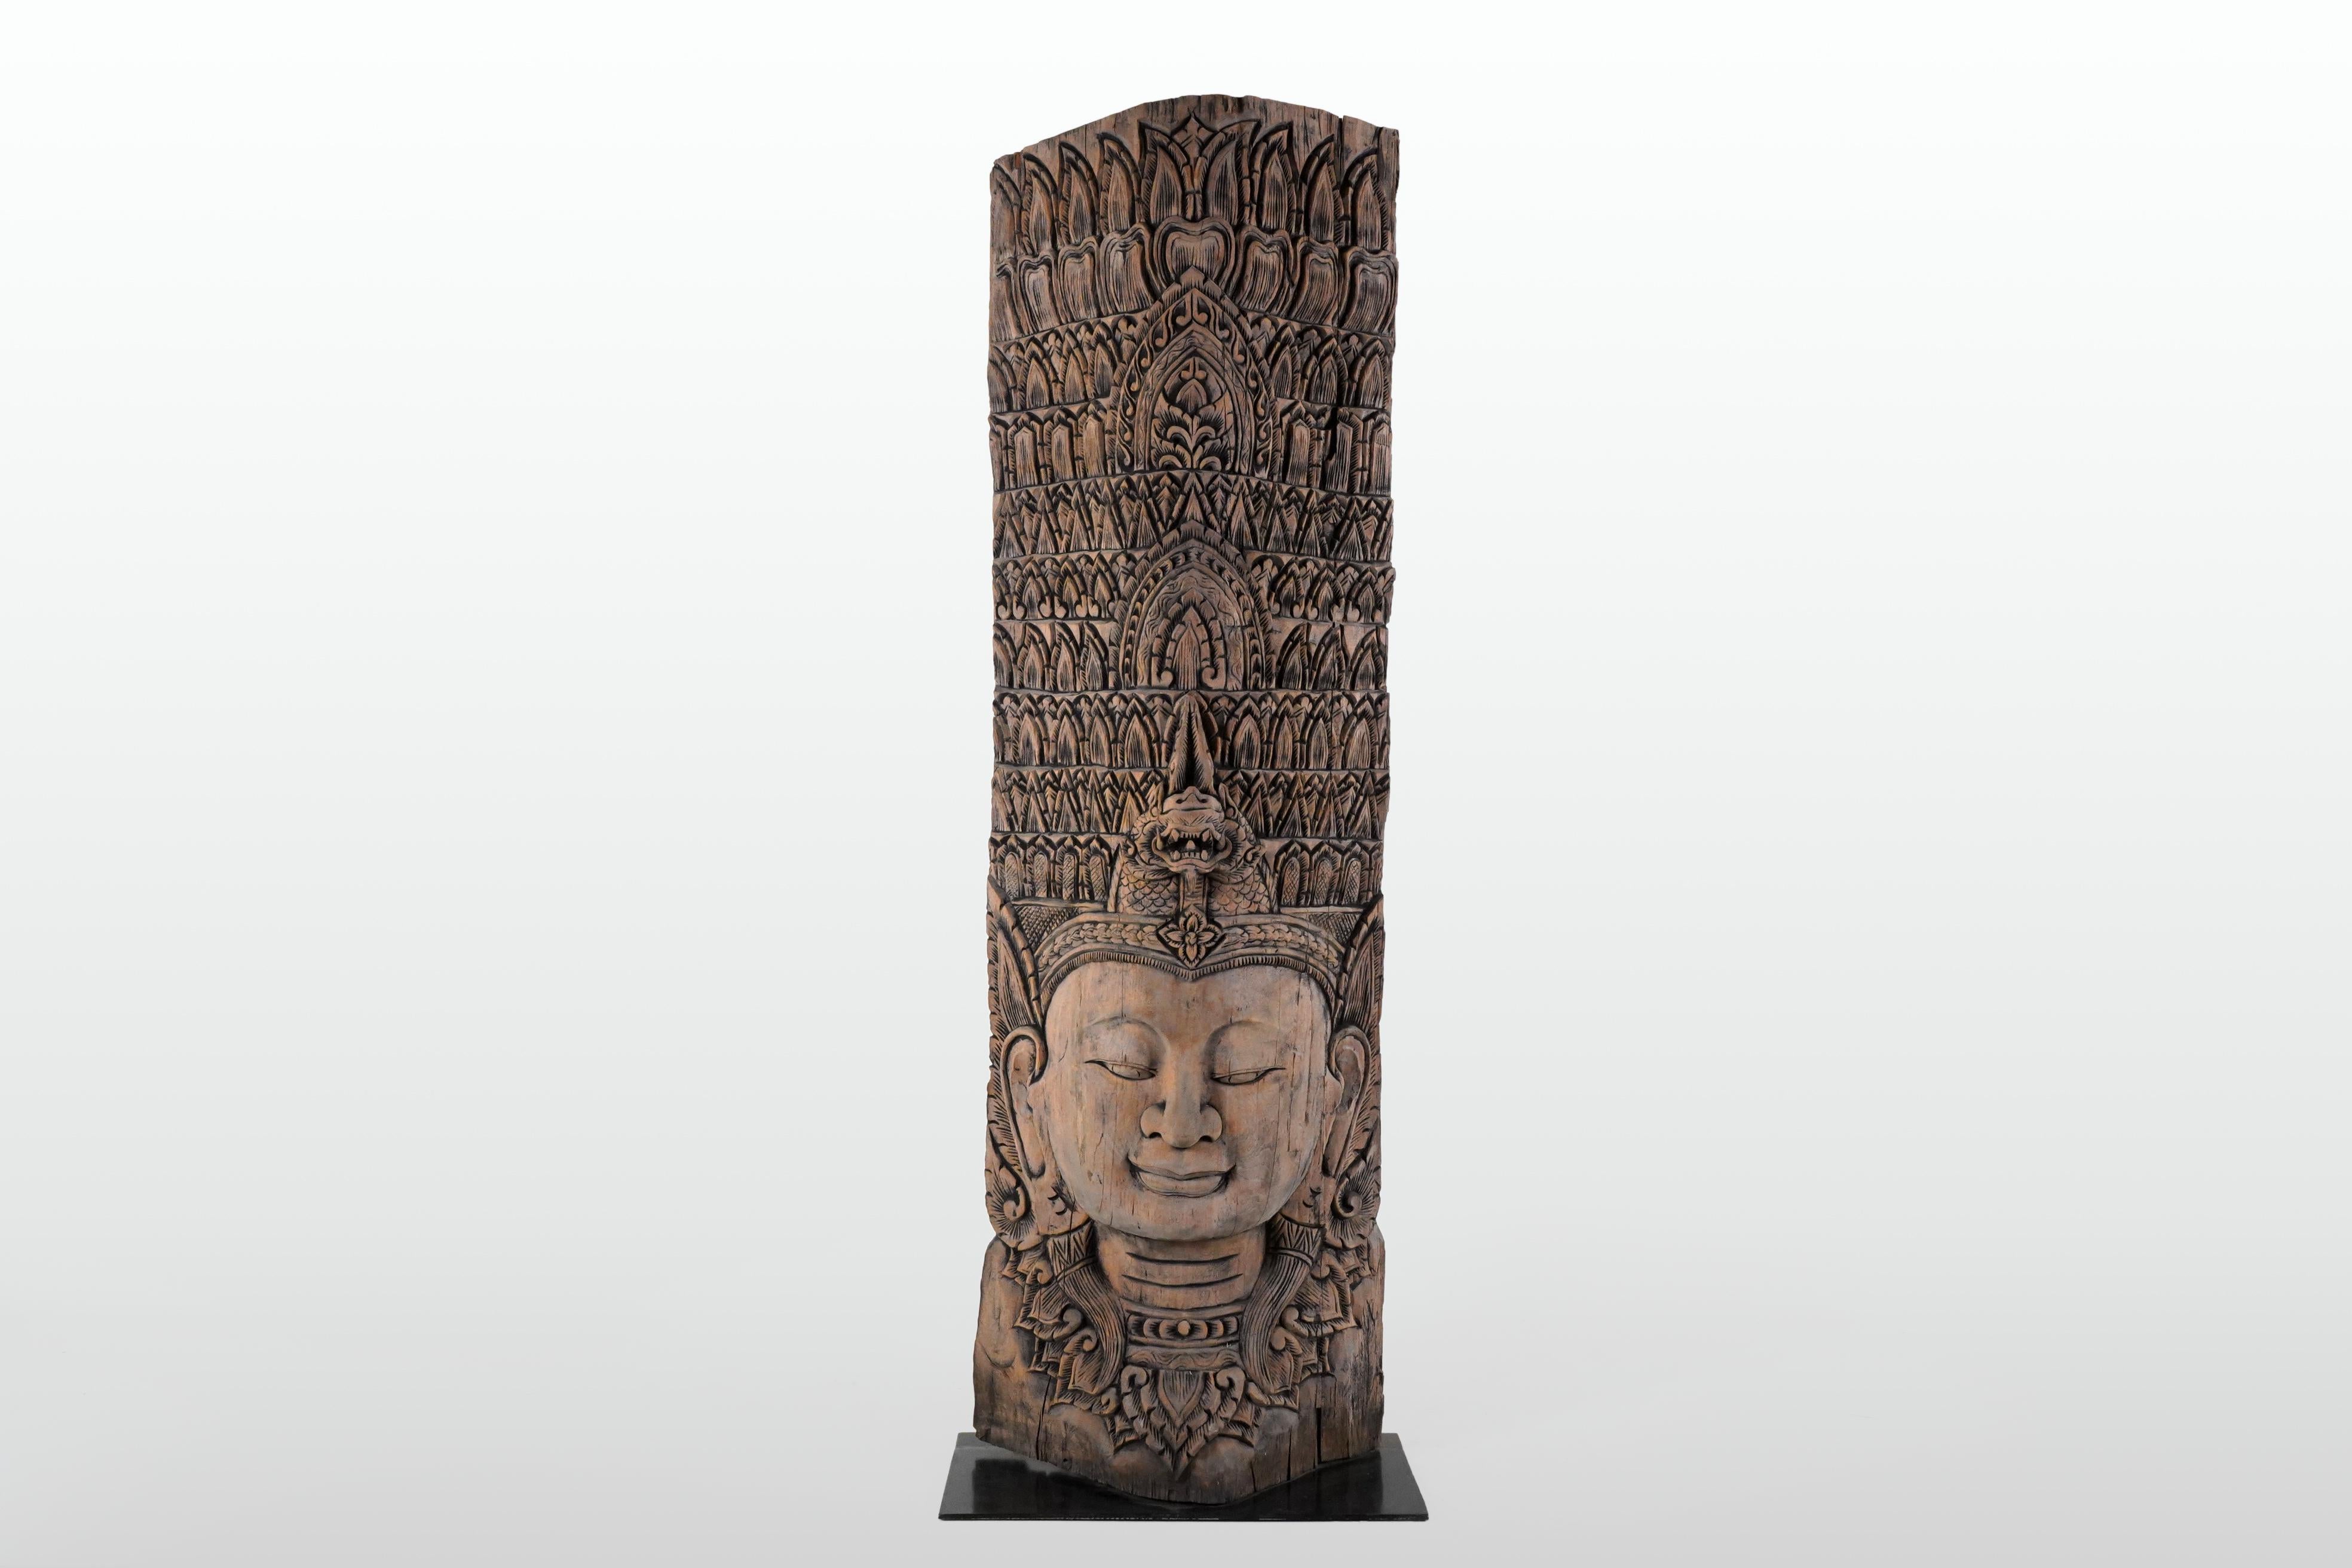 Newly carved from reclaimed teak, this bust takes the form of an Apsara. With origins in both Hindu and Buddhist mythology, apsaras are female spirits of the clouds and waters. They are also referred to as 